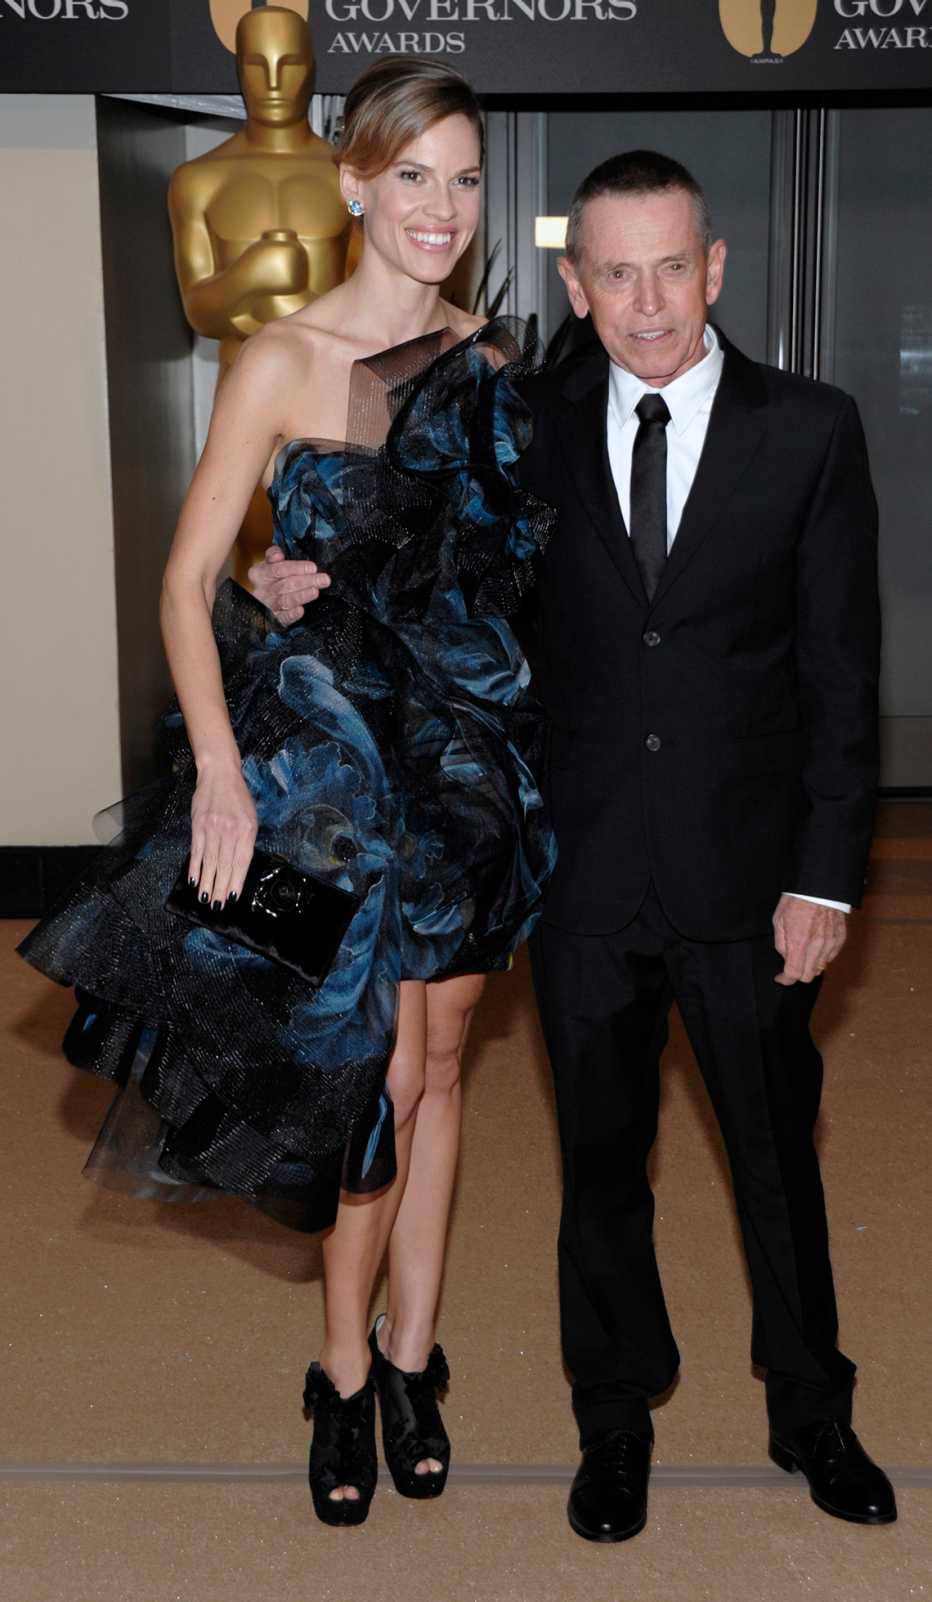 Hilary Swank standing next to her father.